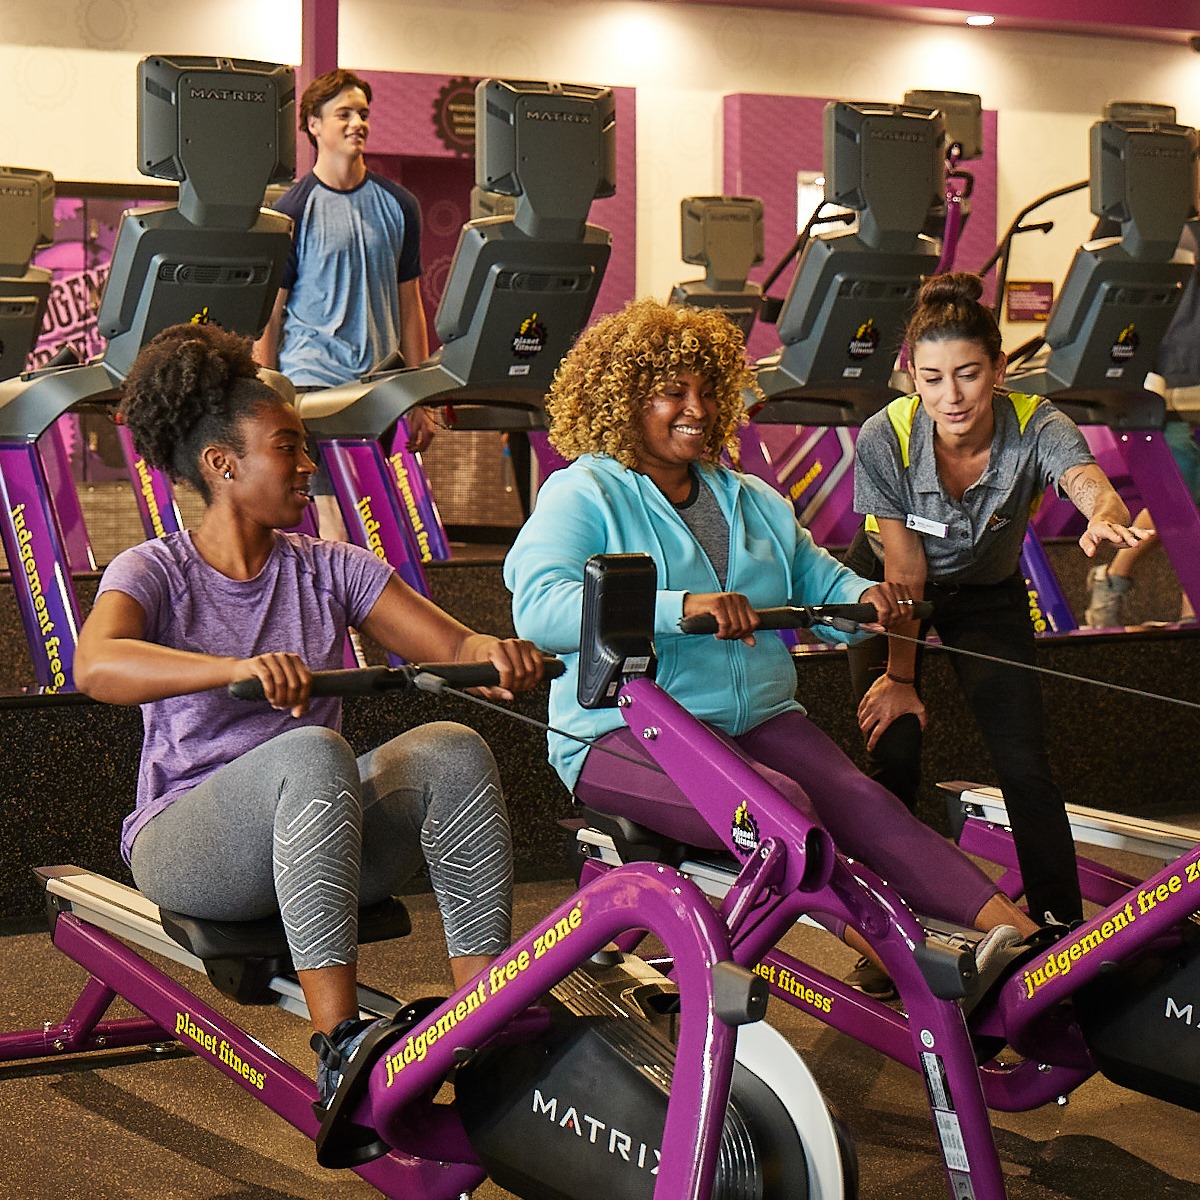  Planet Fitness April 2021 for Weight Loss